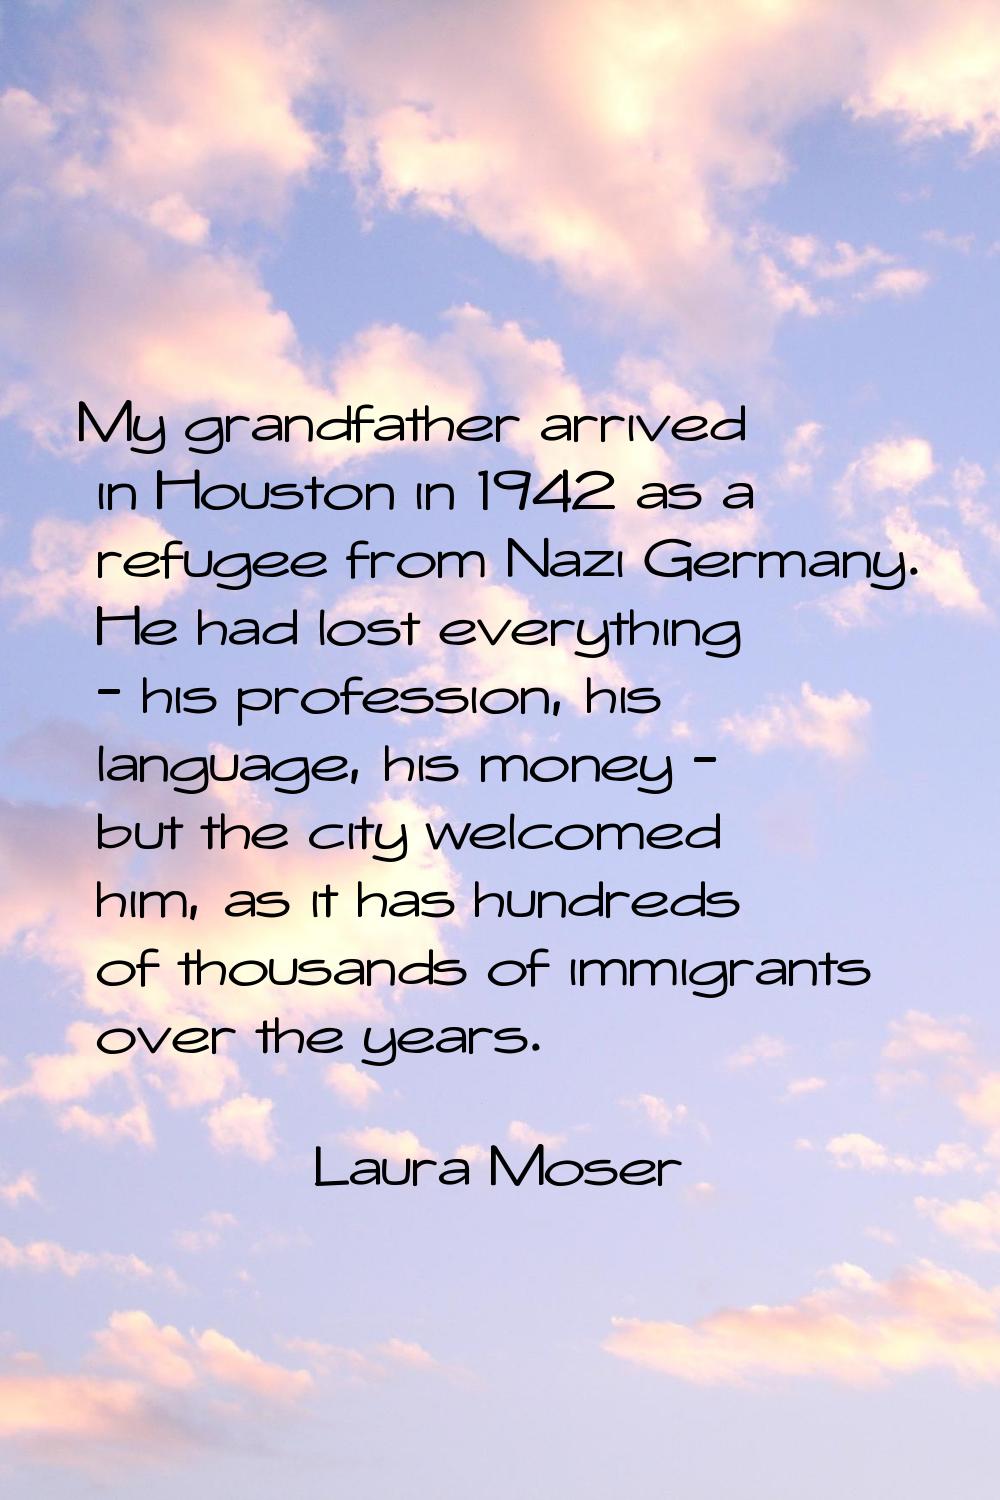 My grandfather arrived in Houston in 1942 as a refugee from Nazi Germany. He had lost everything - 